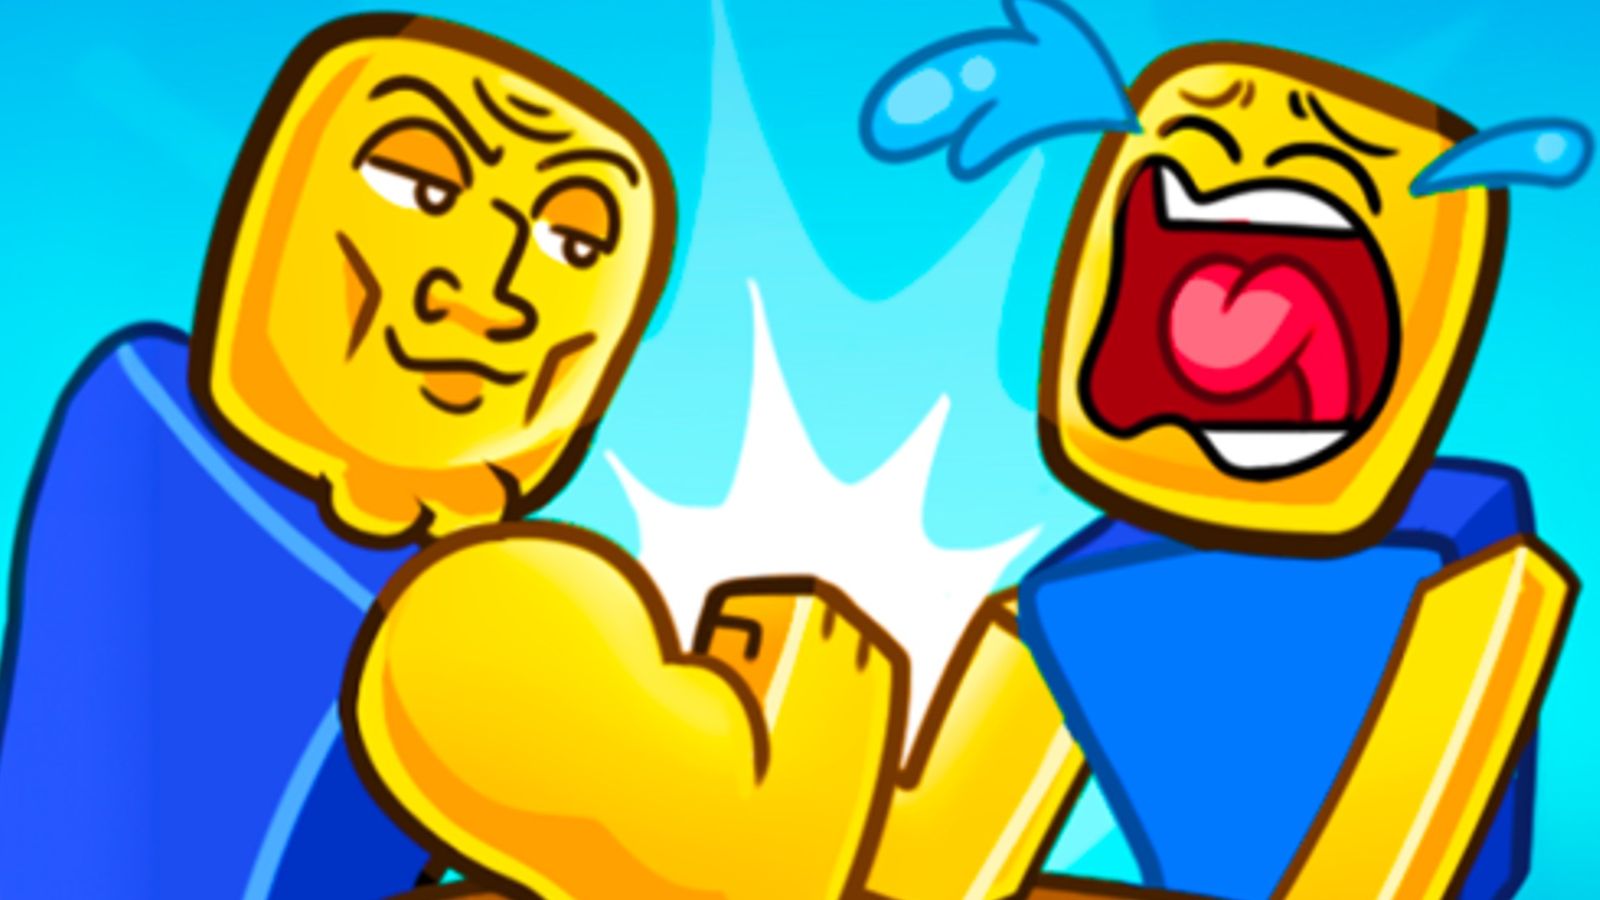 Two Roblox characters arm wrestling in Arm Wrestle Simulator.